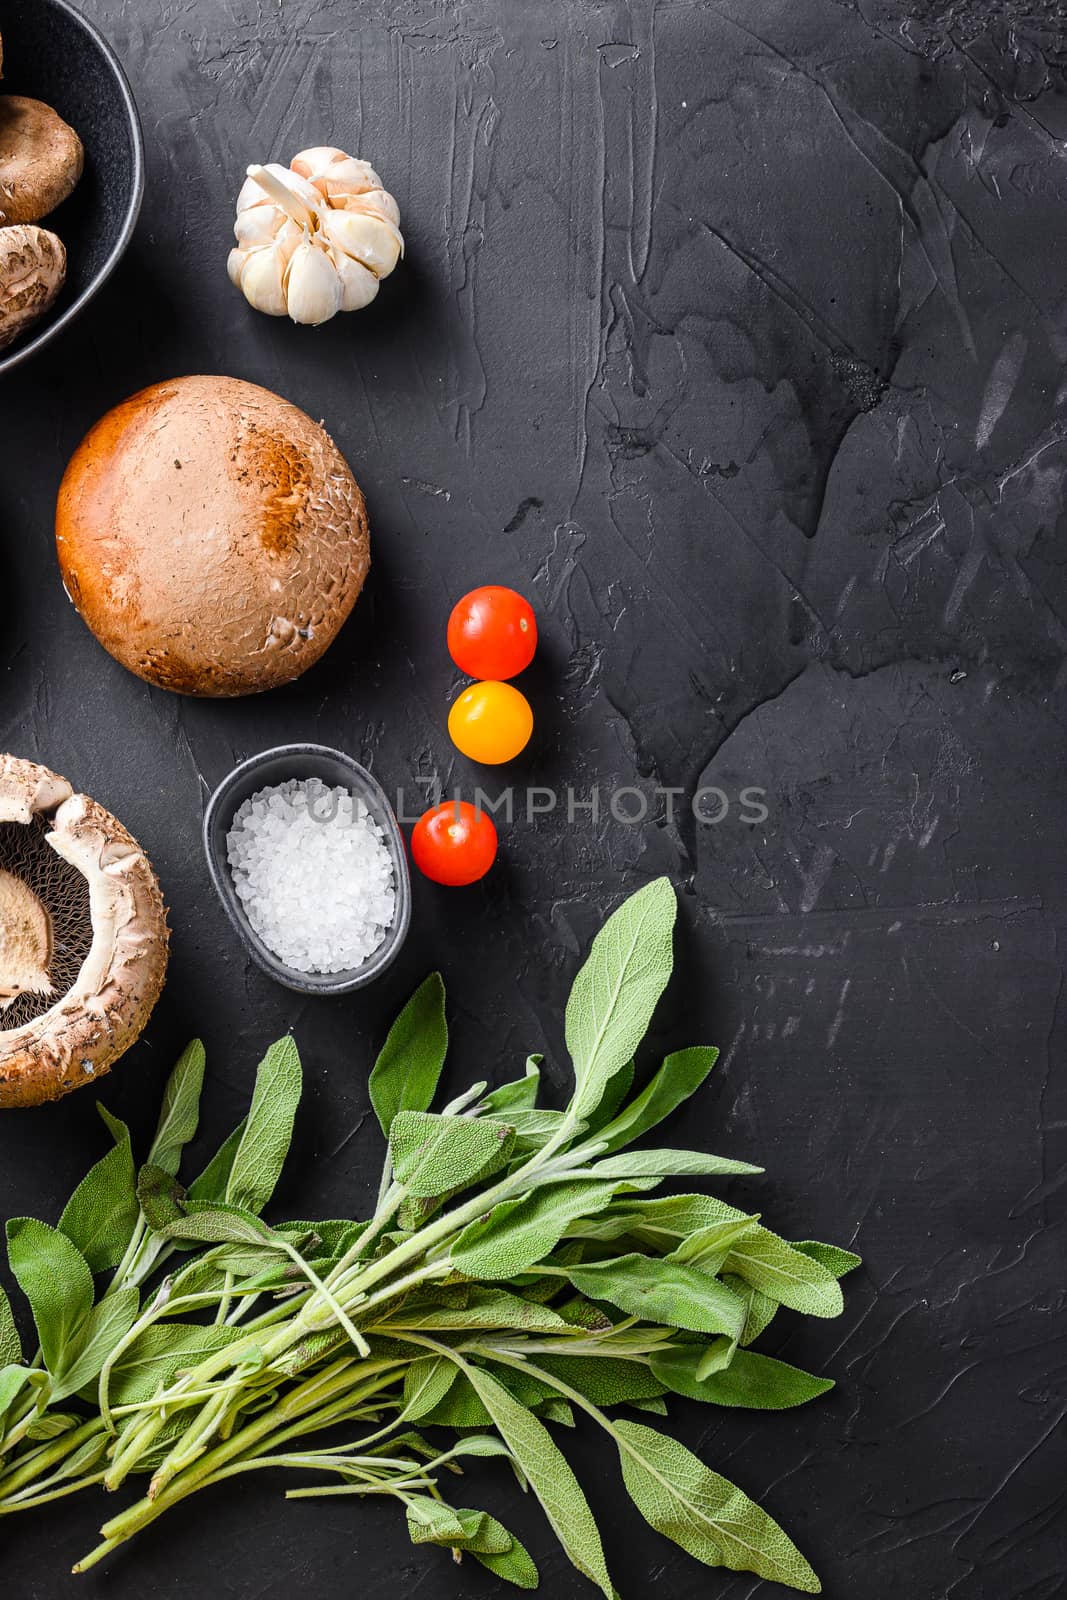 Portabello mushrooms ingredients for baking, cheddar cheese and sage on black background. Top view space for text